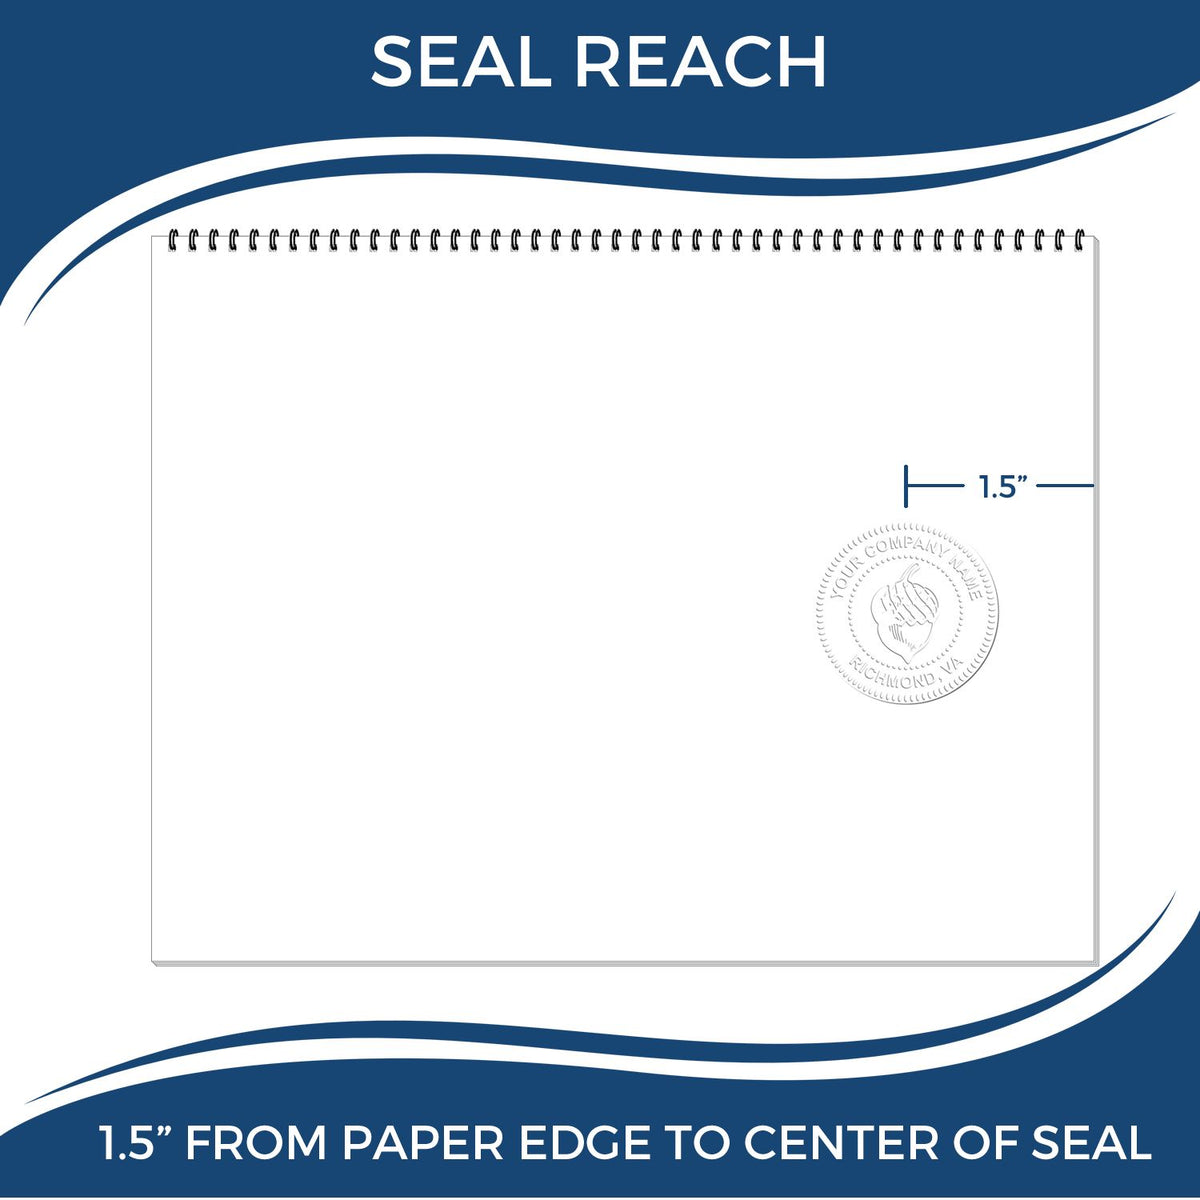 An infographic showing the seal reach which is represented by a ruler and a miniature seal image of the Handheld Arkansas Land Surveyor Seal